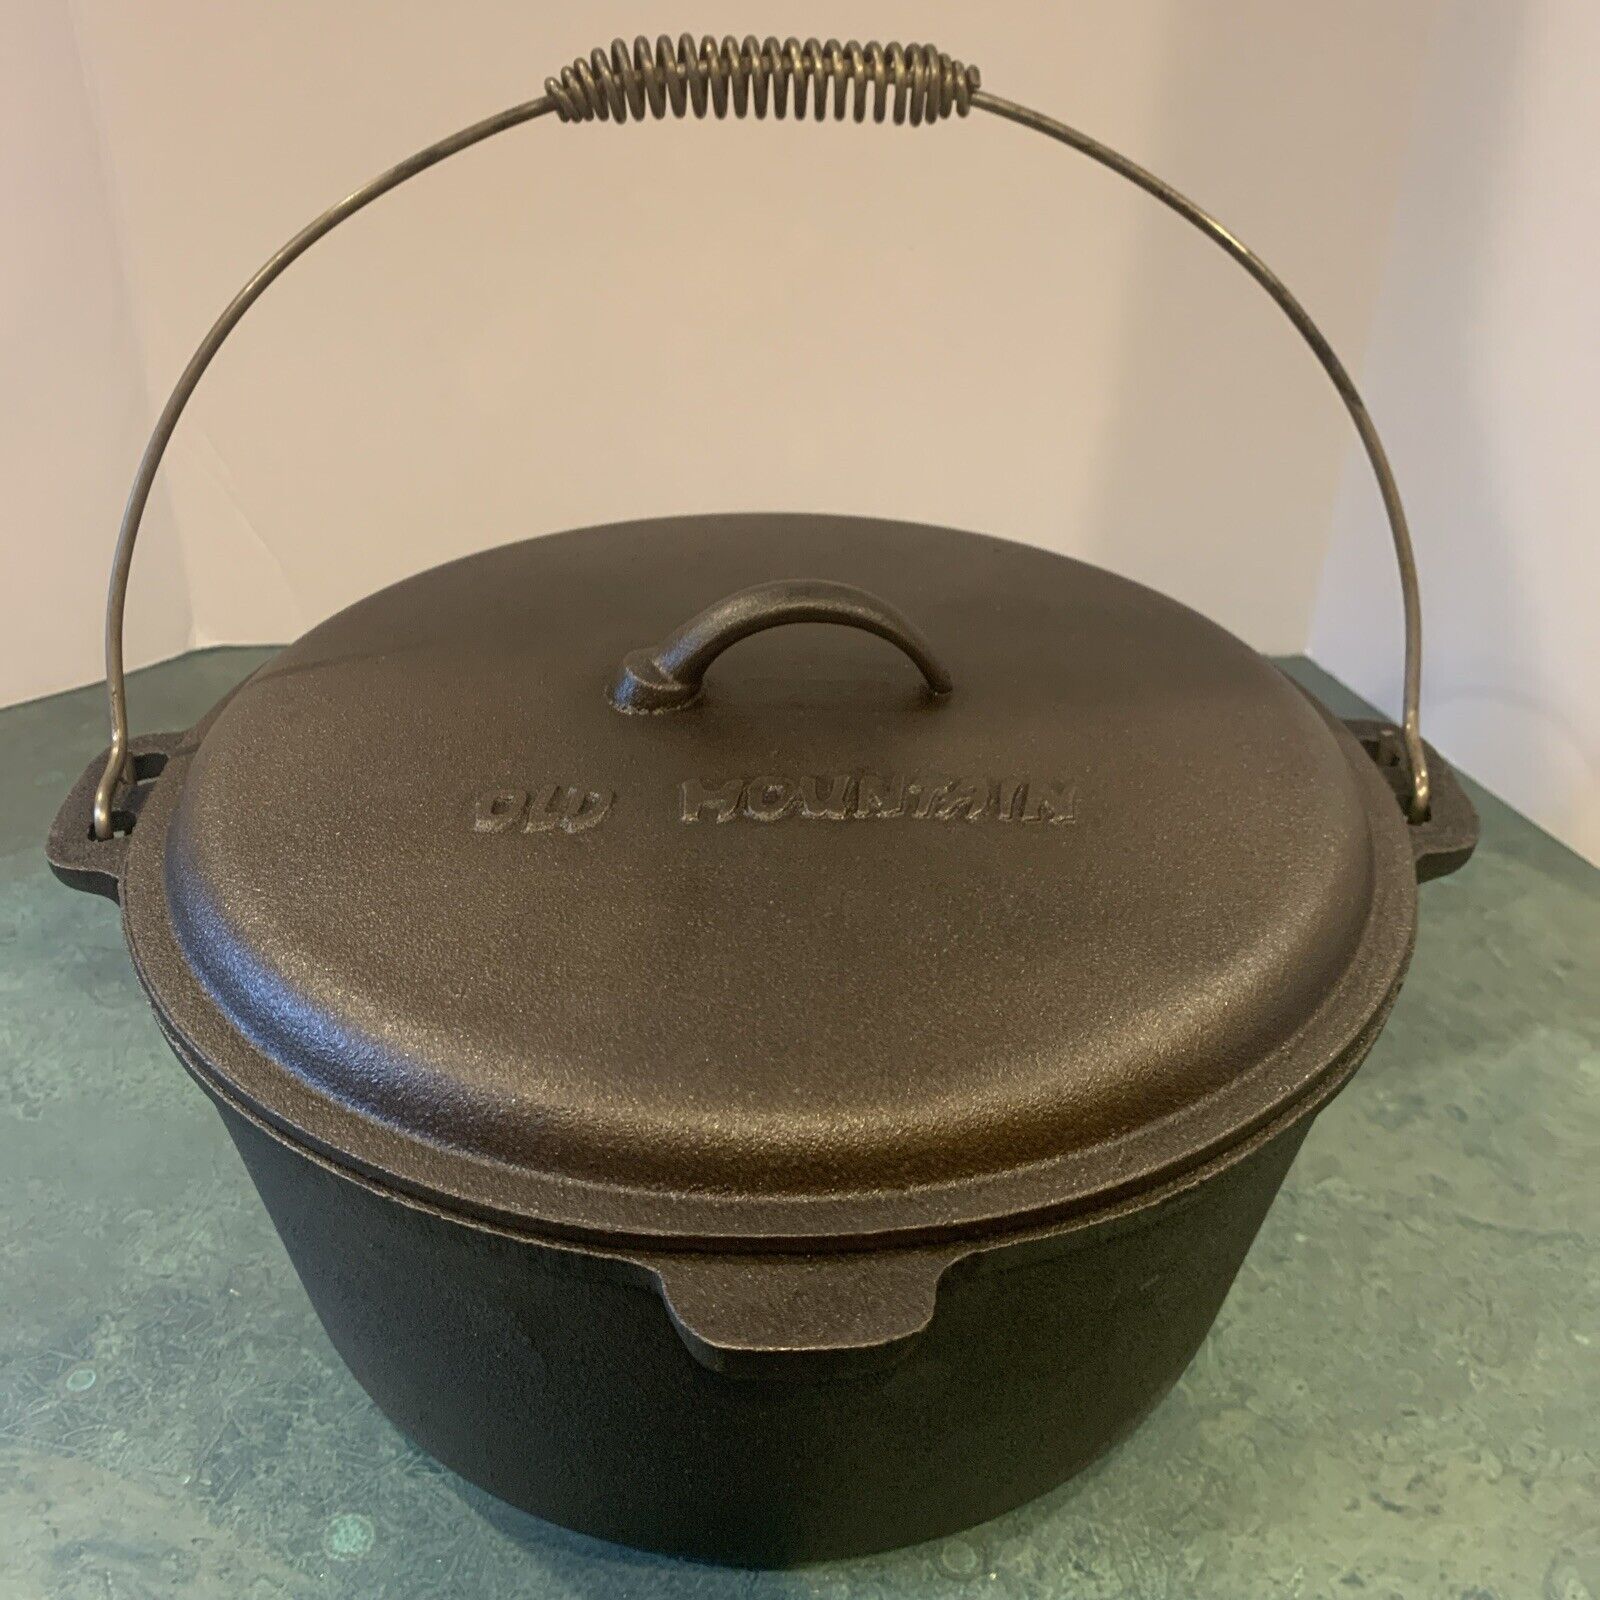 “Old Mountain” Extra Large Cast Iron Dutch Oven:/Roaster *12” Diameter With Lid